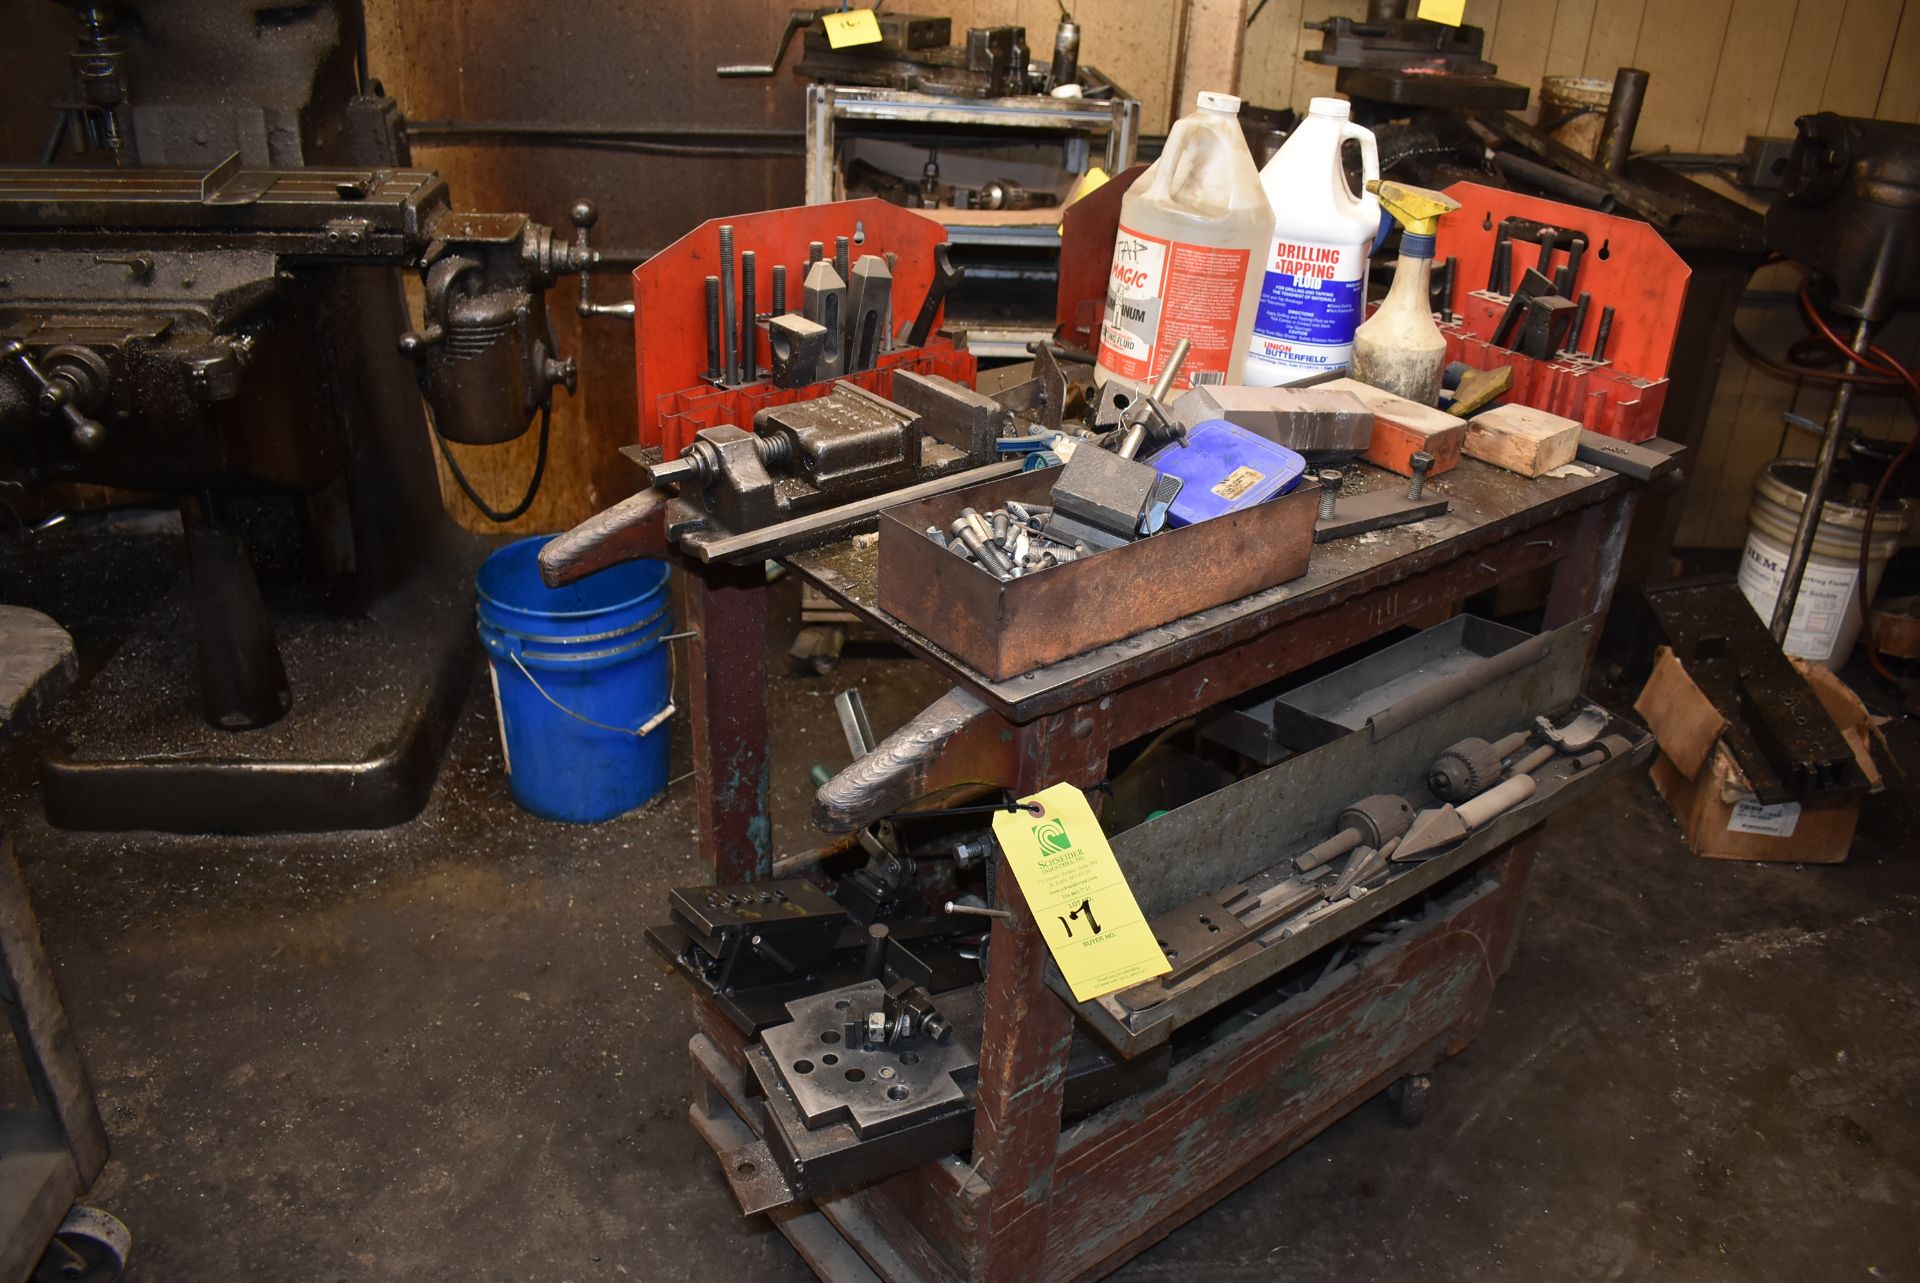 Shop Cart w/Contents - Machine Vise, Hold Downs, Assorted Tools